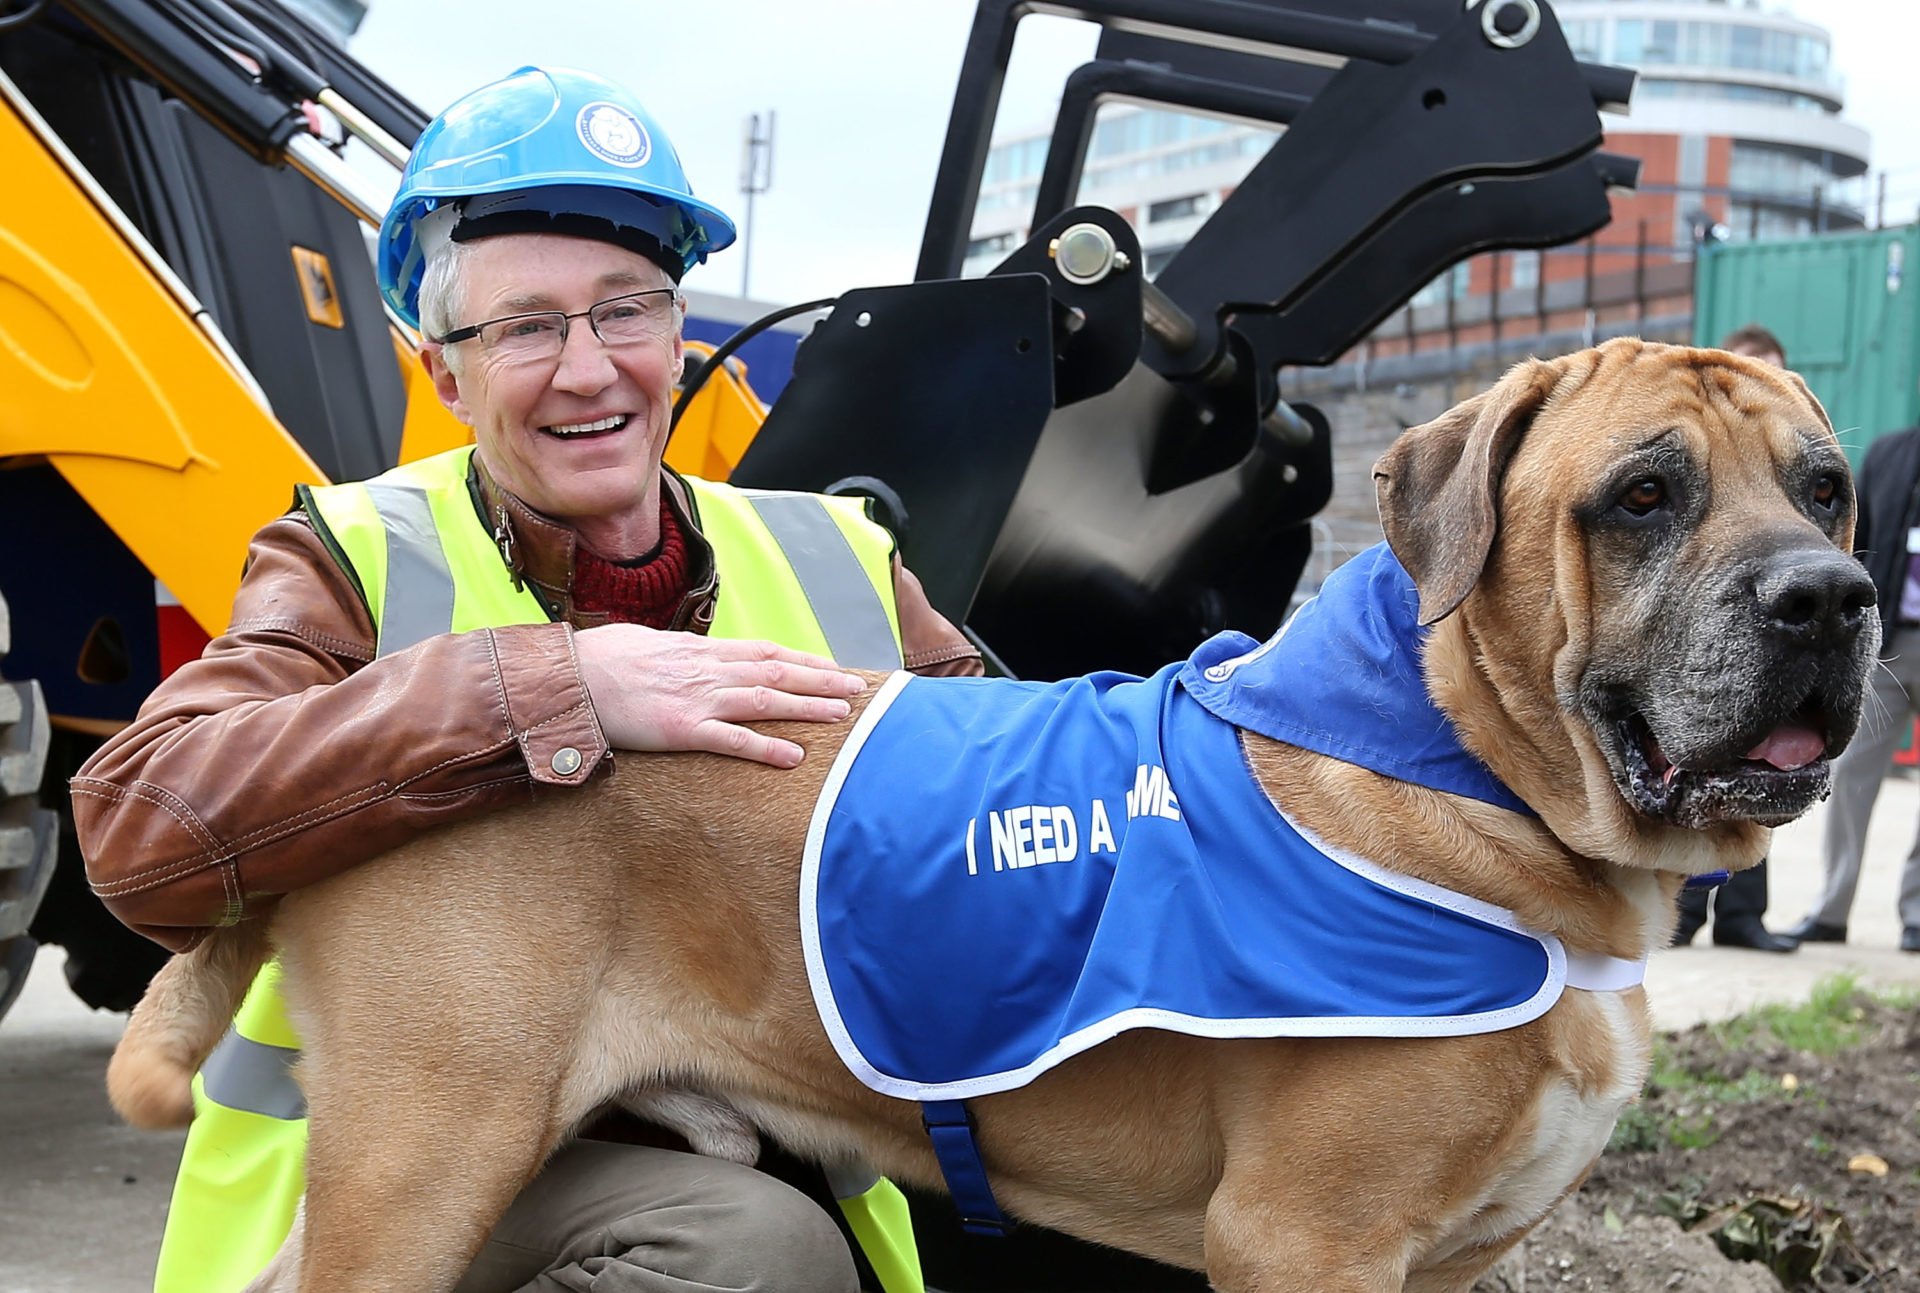 What happened to Paul O’Grady’s dog Buster and how many pups did he have?